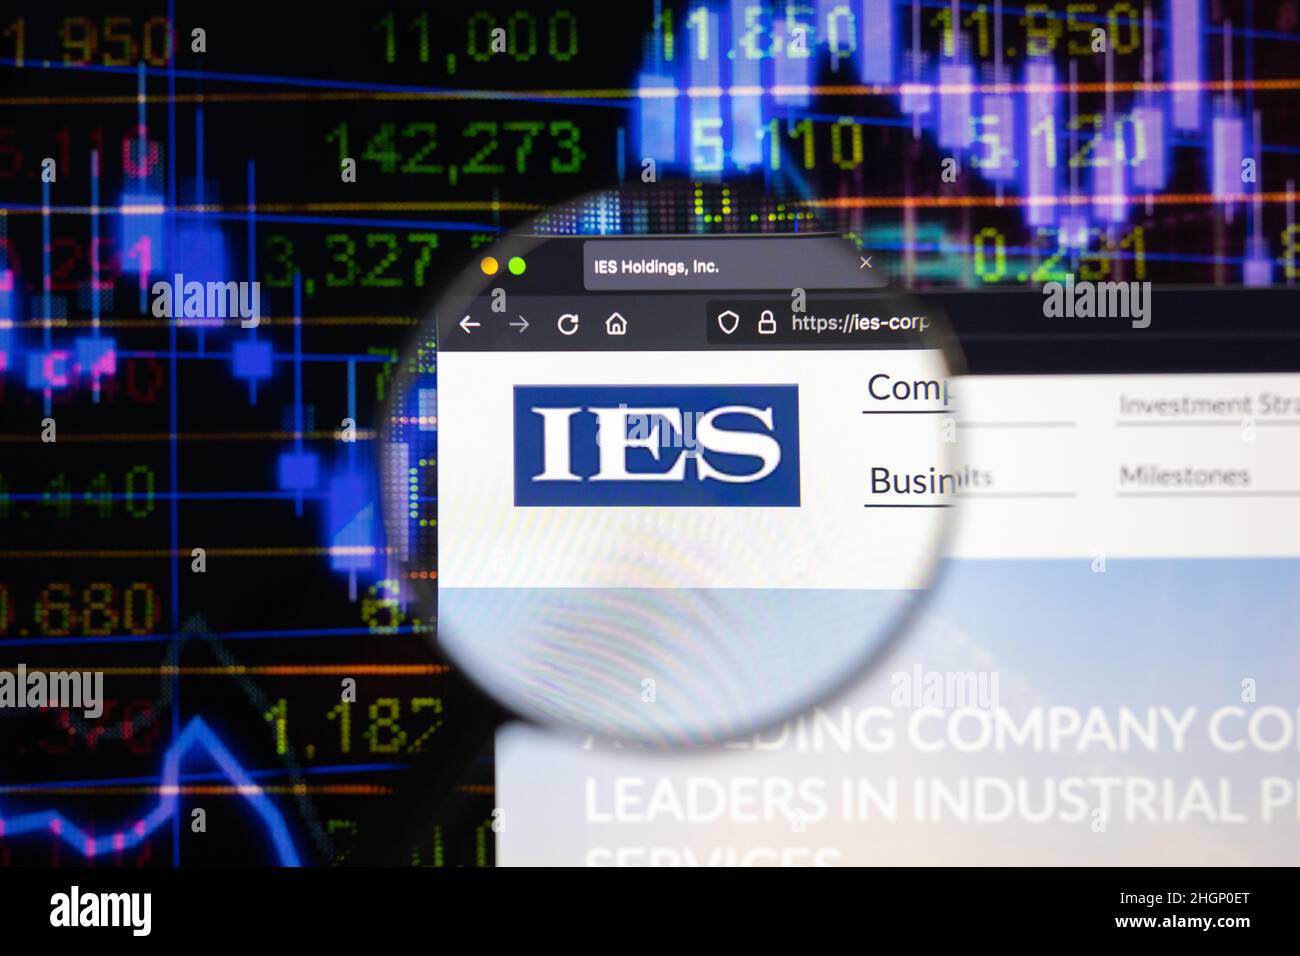 IES company logo on a website with blurry stock market developments in the background, seen on a computer screen through a magnifying glass. Stock Photo